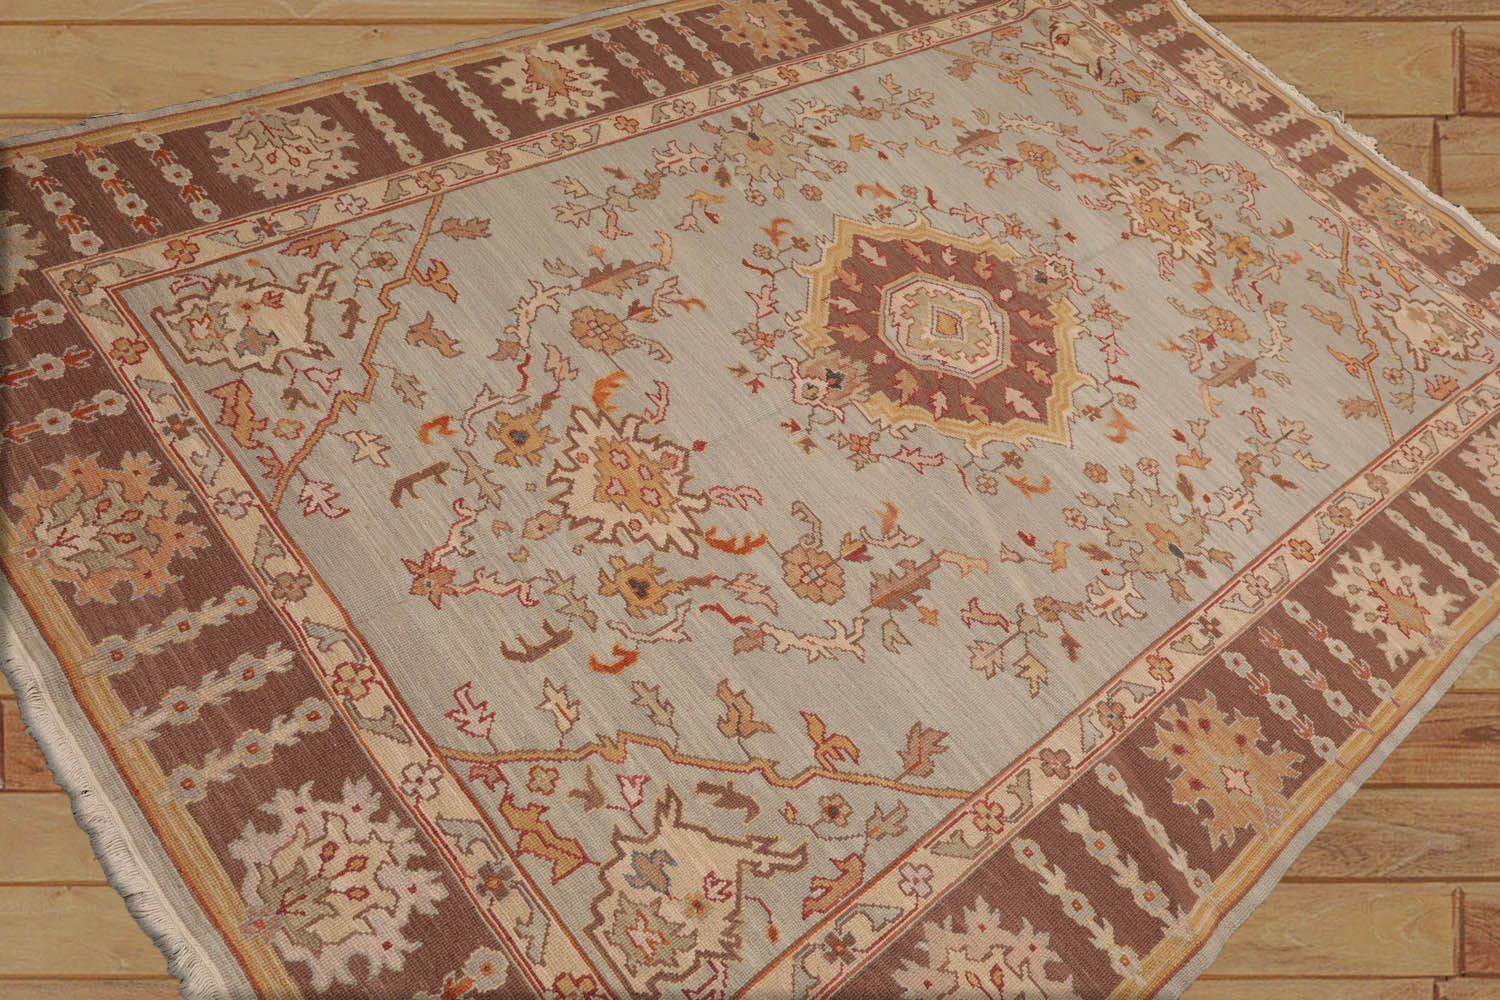 Yerby 6x9 Hand Knotted Sino Persian 100% Wool Nourison Nourmak Traditional Oriental Area Rug Moss, Brown Color